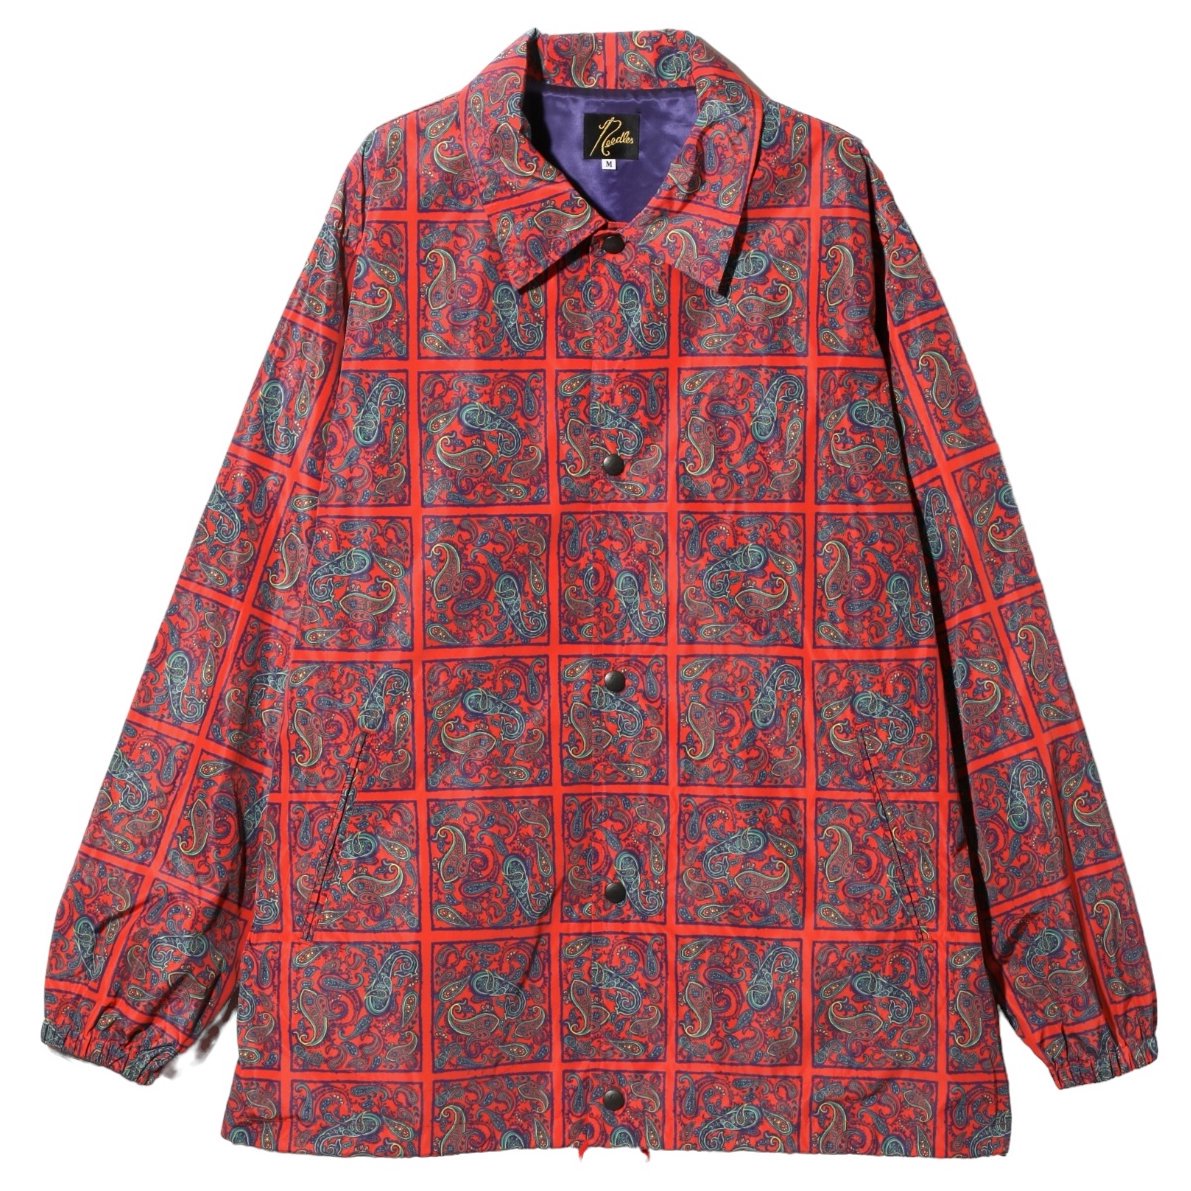 NEEDLES <BR>Coach Jacket - Poly Taffeta / Printed Red Square - (RED)


